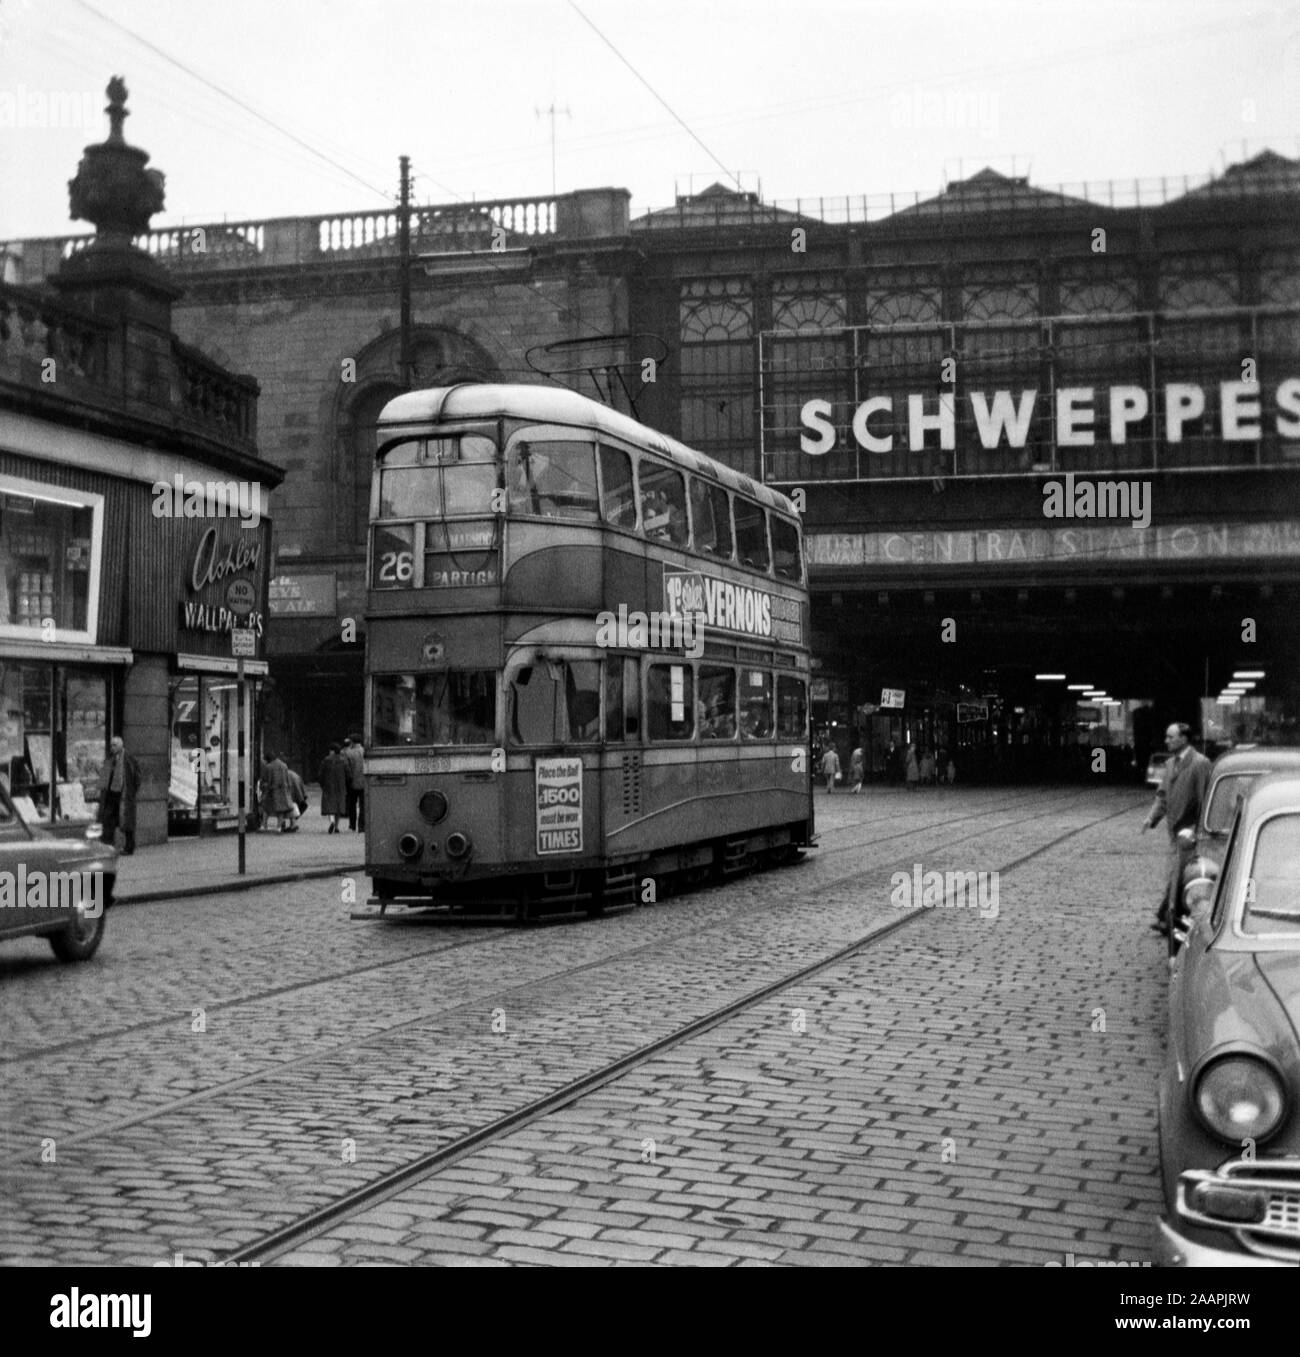 Glasgow Corporation Tramway tram no 1266 outside Central Station, Argyle Street. Image taken before the closure of the tramlines which was in 1962 Stock Photo